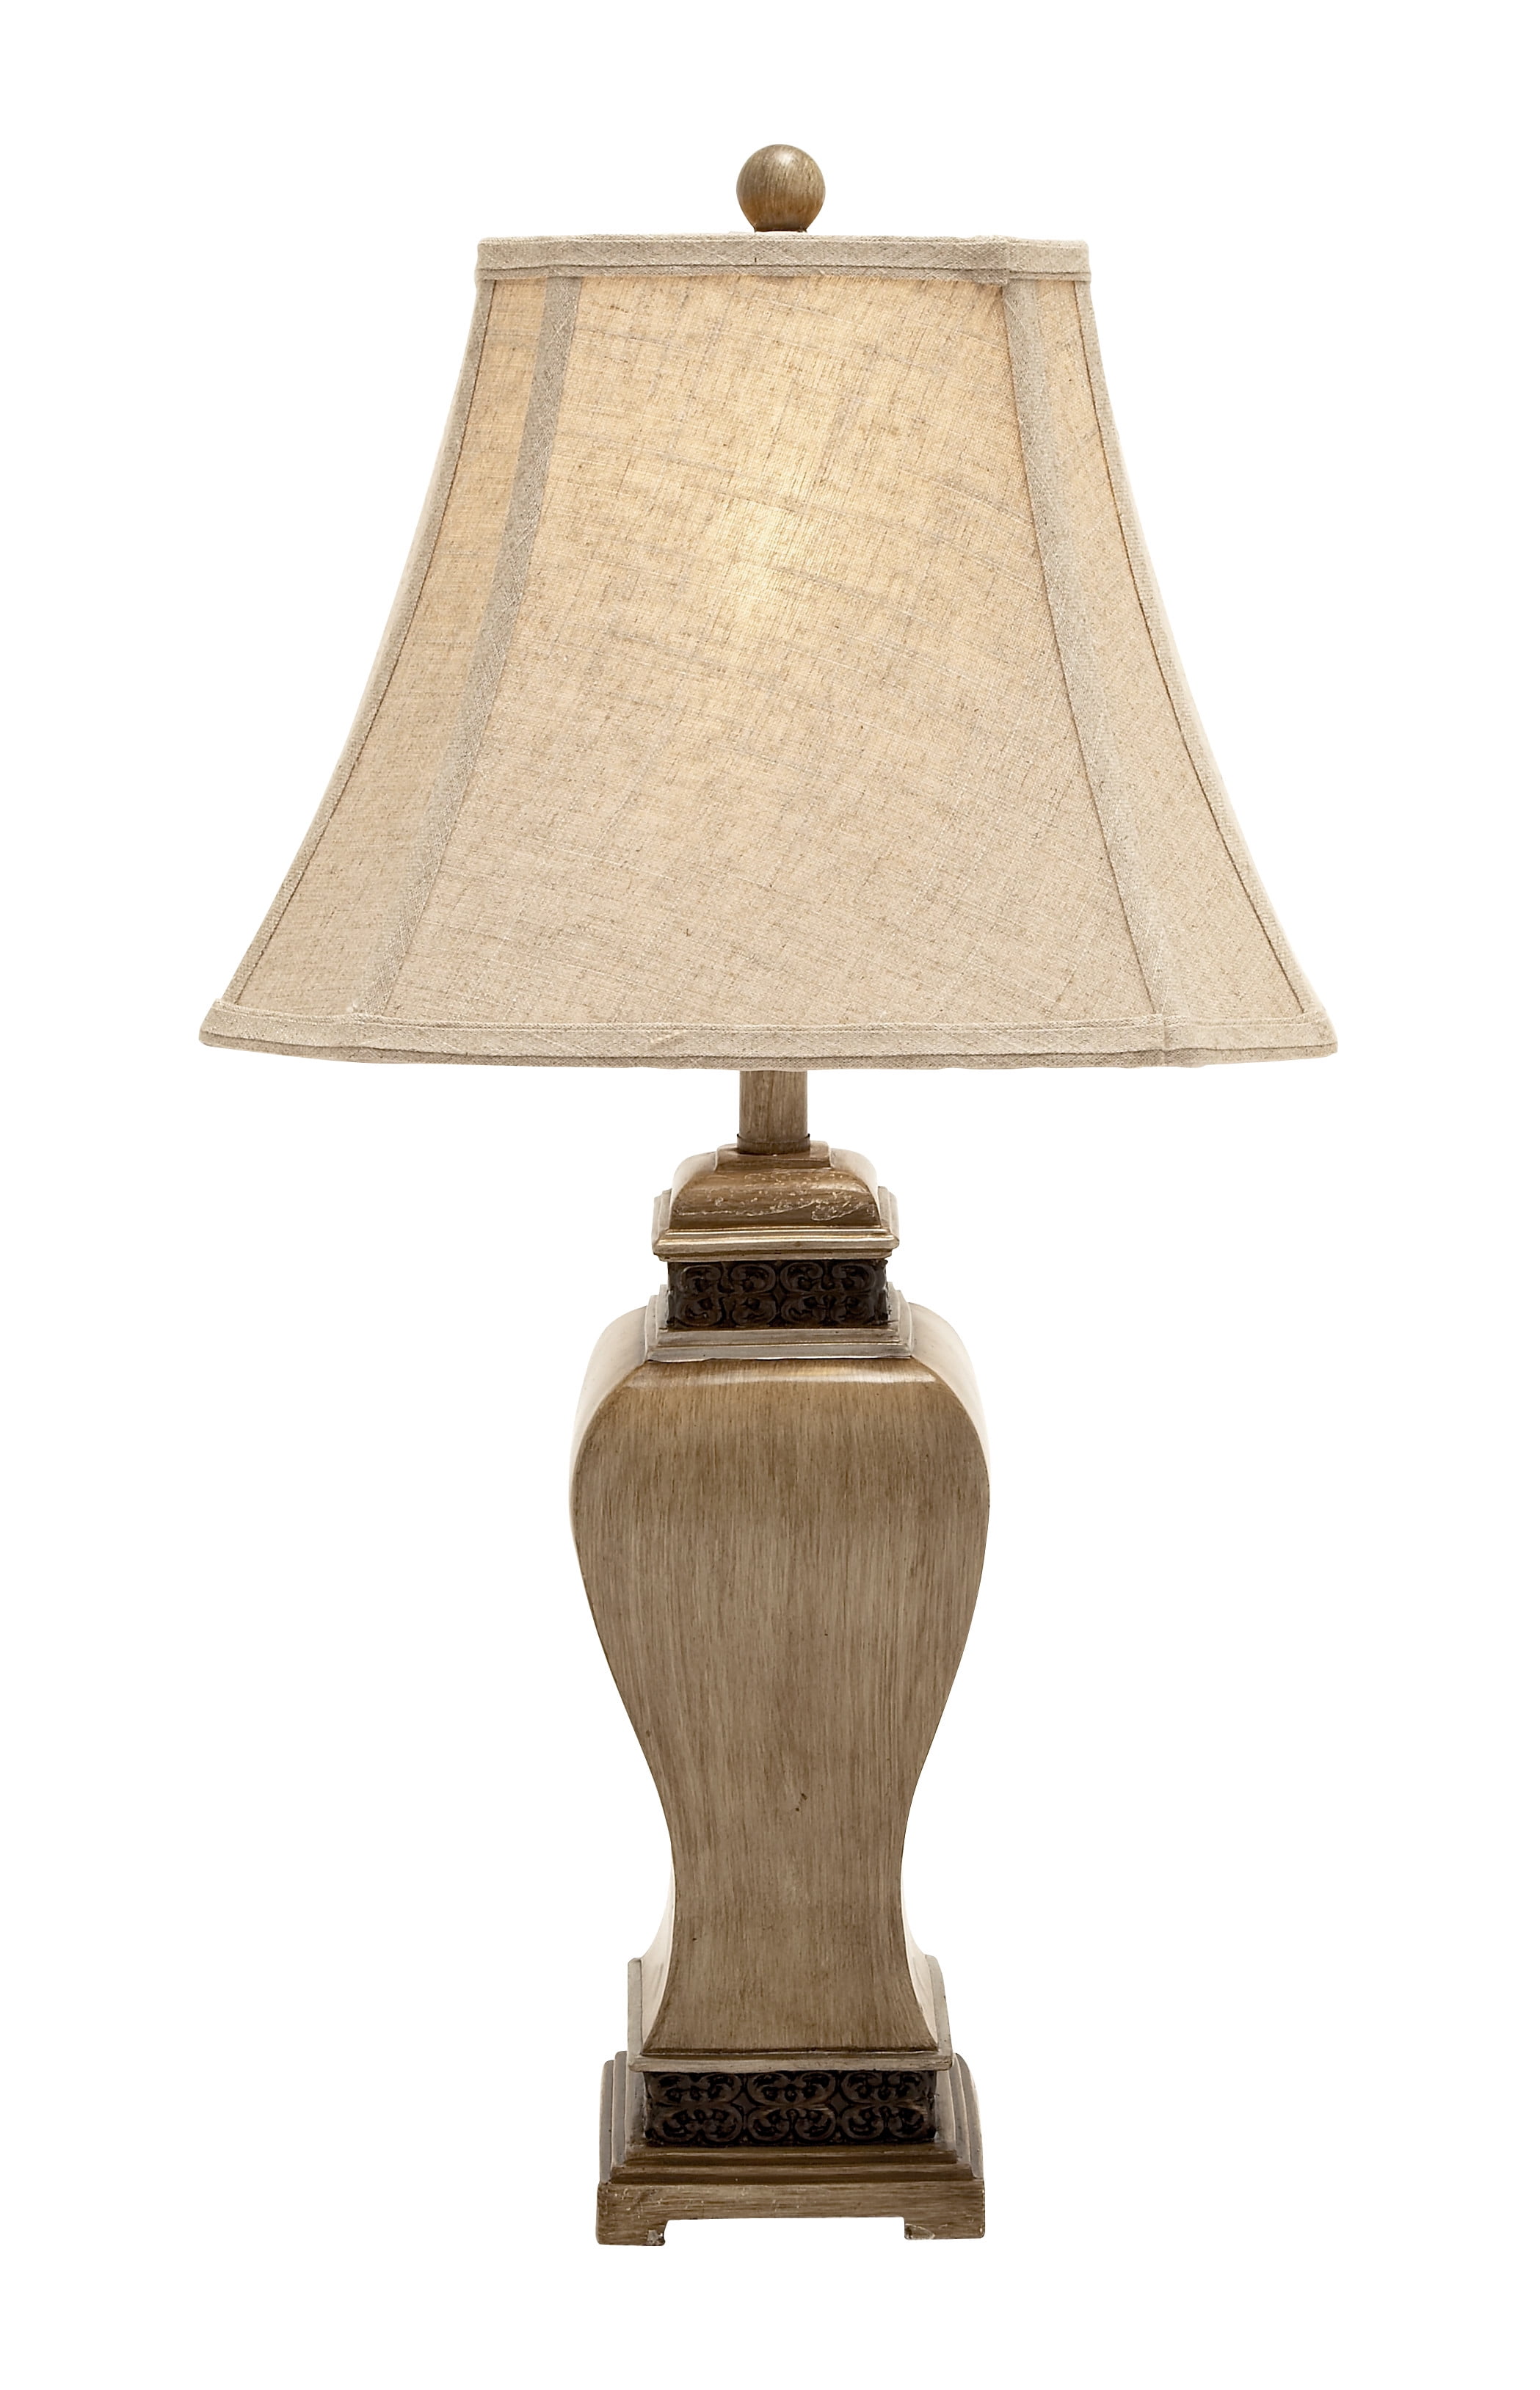 NEW LARGE 33" AGED BRONZE GRAY GLAZE TABLE LAMP BROWN LINEN SHADE TUSCAN LIGHT 